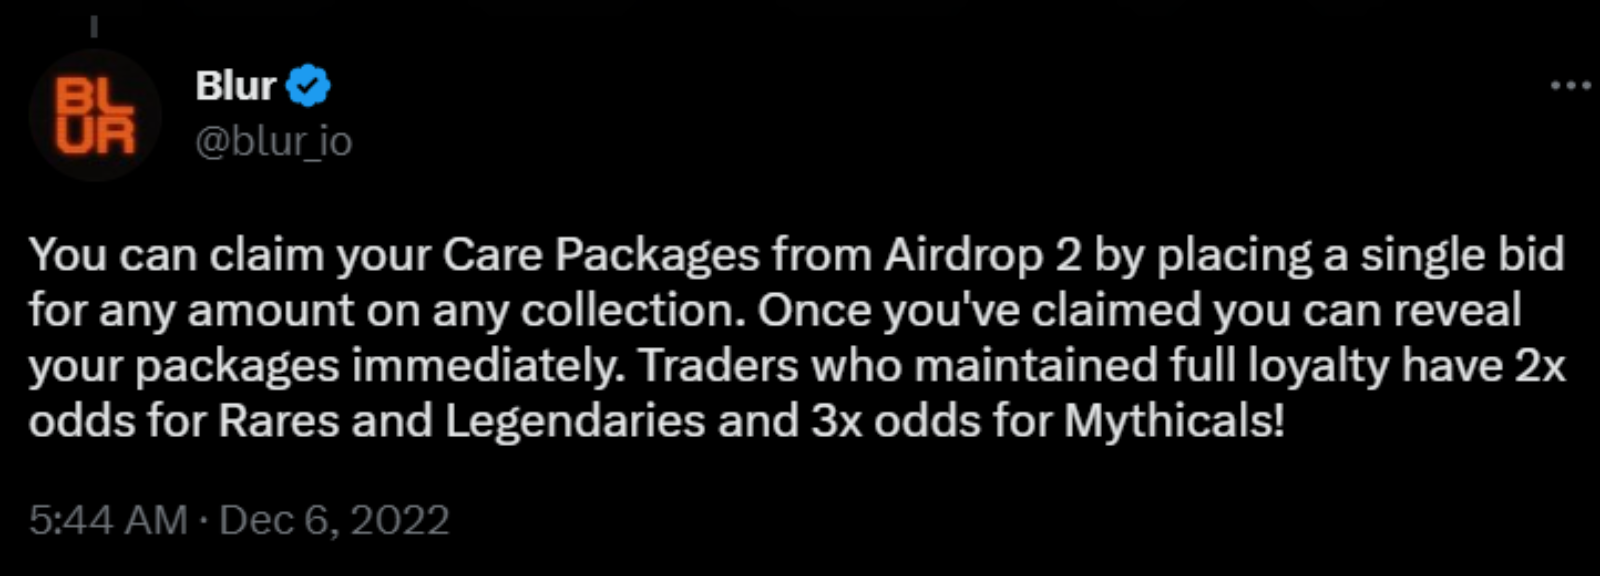 Users can qualify for Blur token airdrop season 2 through bid points too.